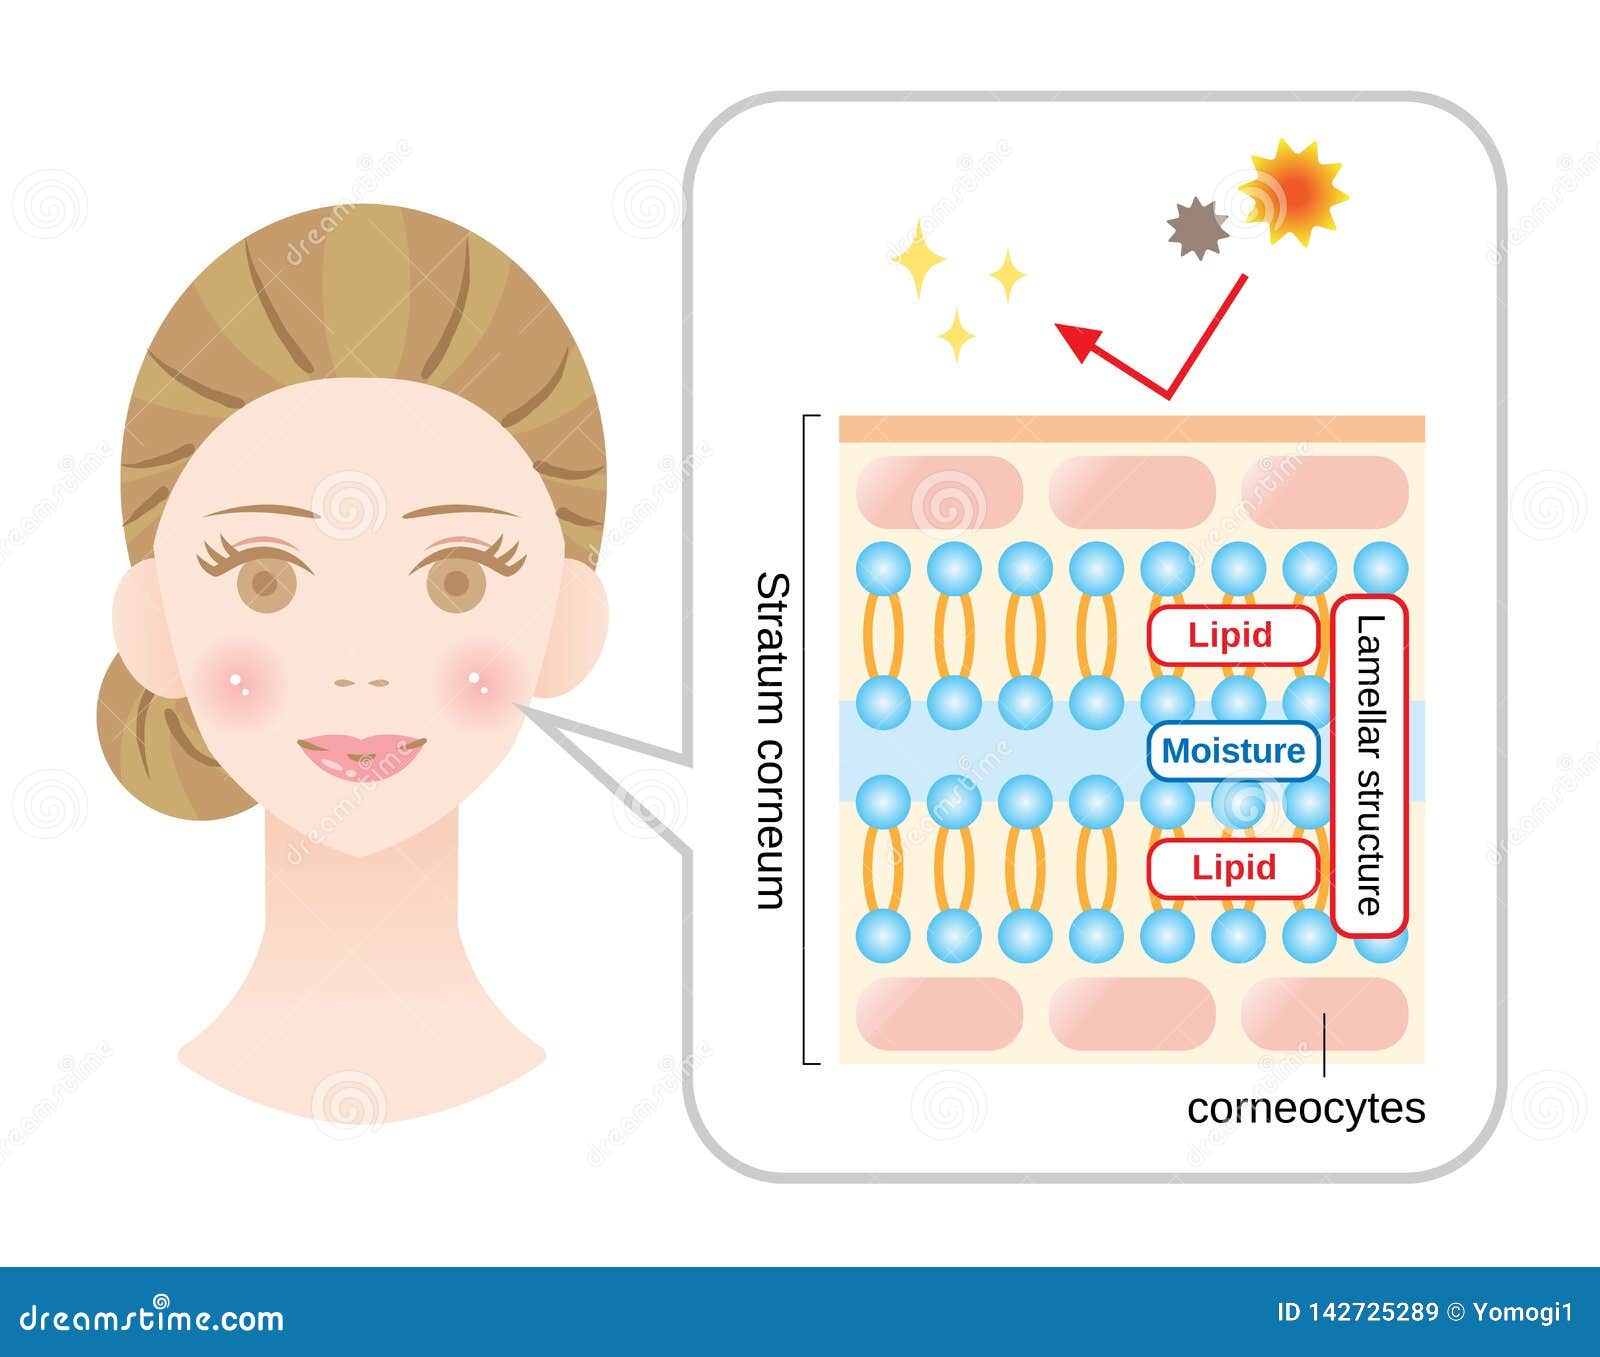 healthy skin diagram with woman face. structure of stratum corneum and lamellar structure, which play the protective role for skin